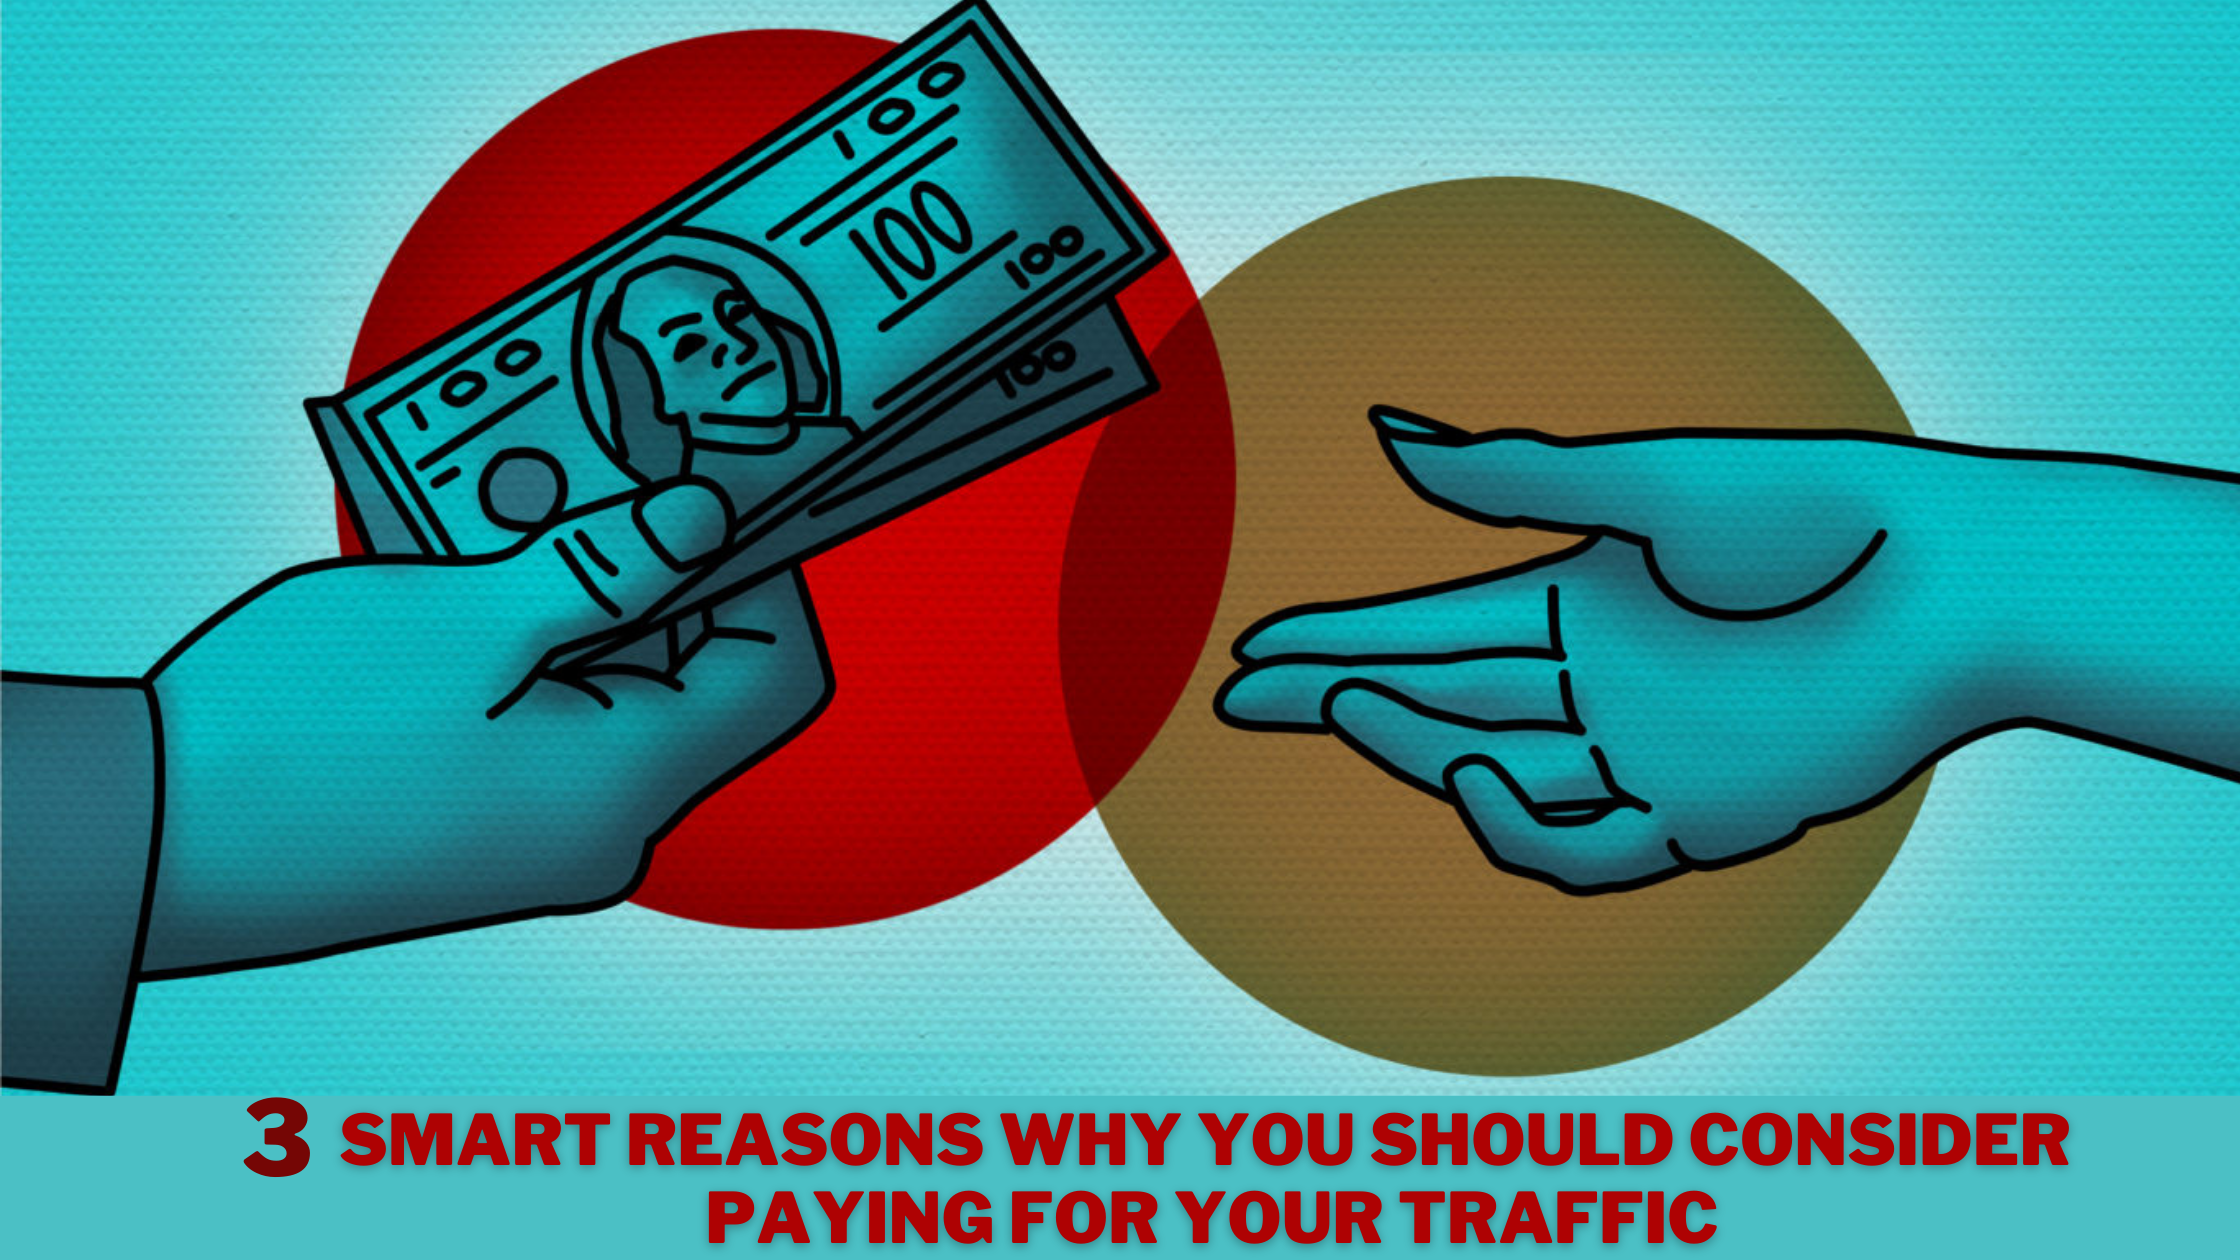 3 Smart Reasons Why You Should Consider Paying for Your Traffic